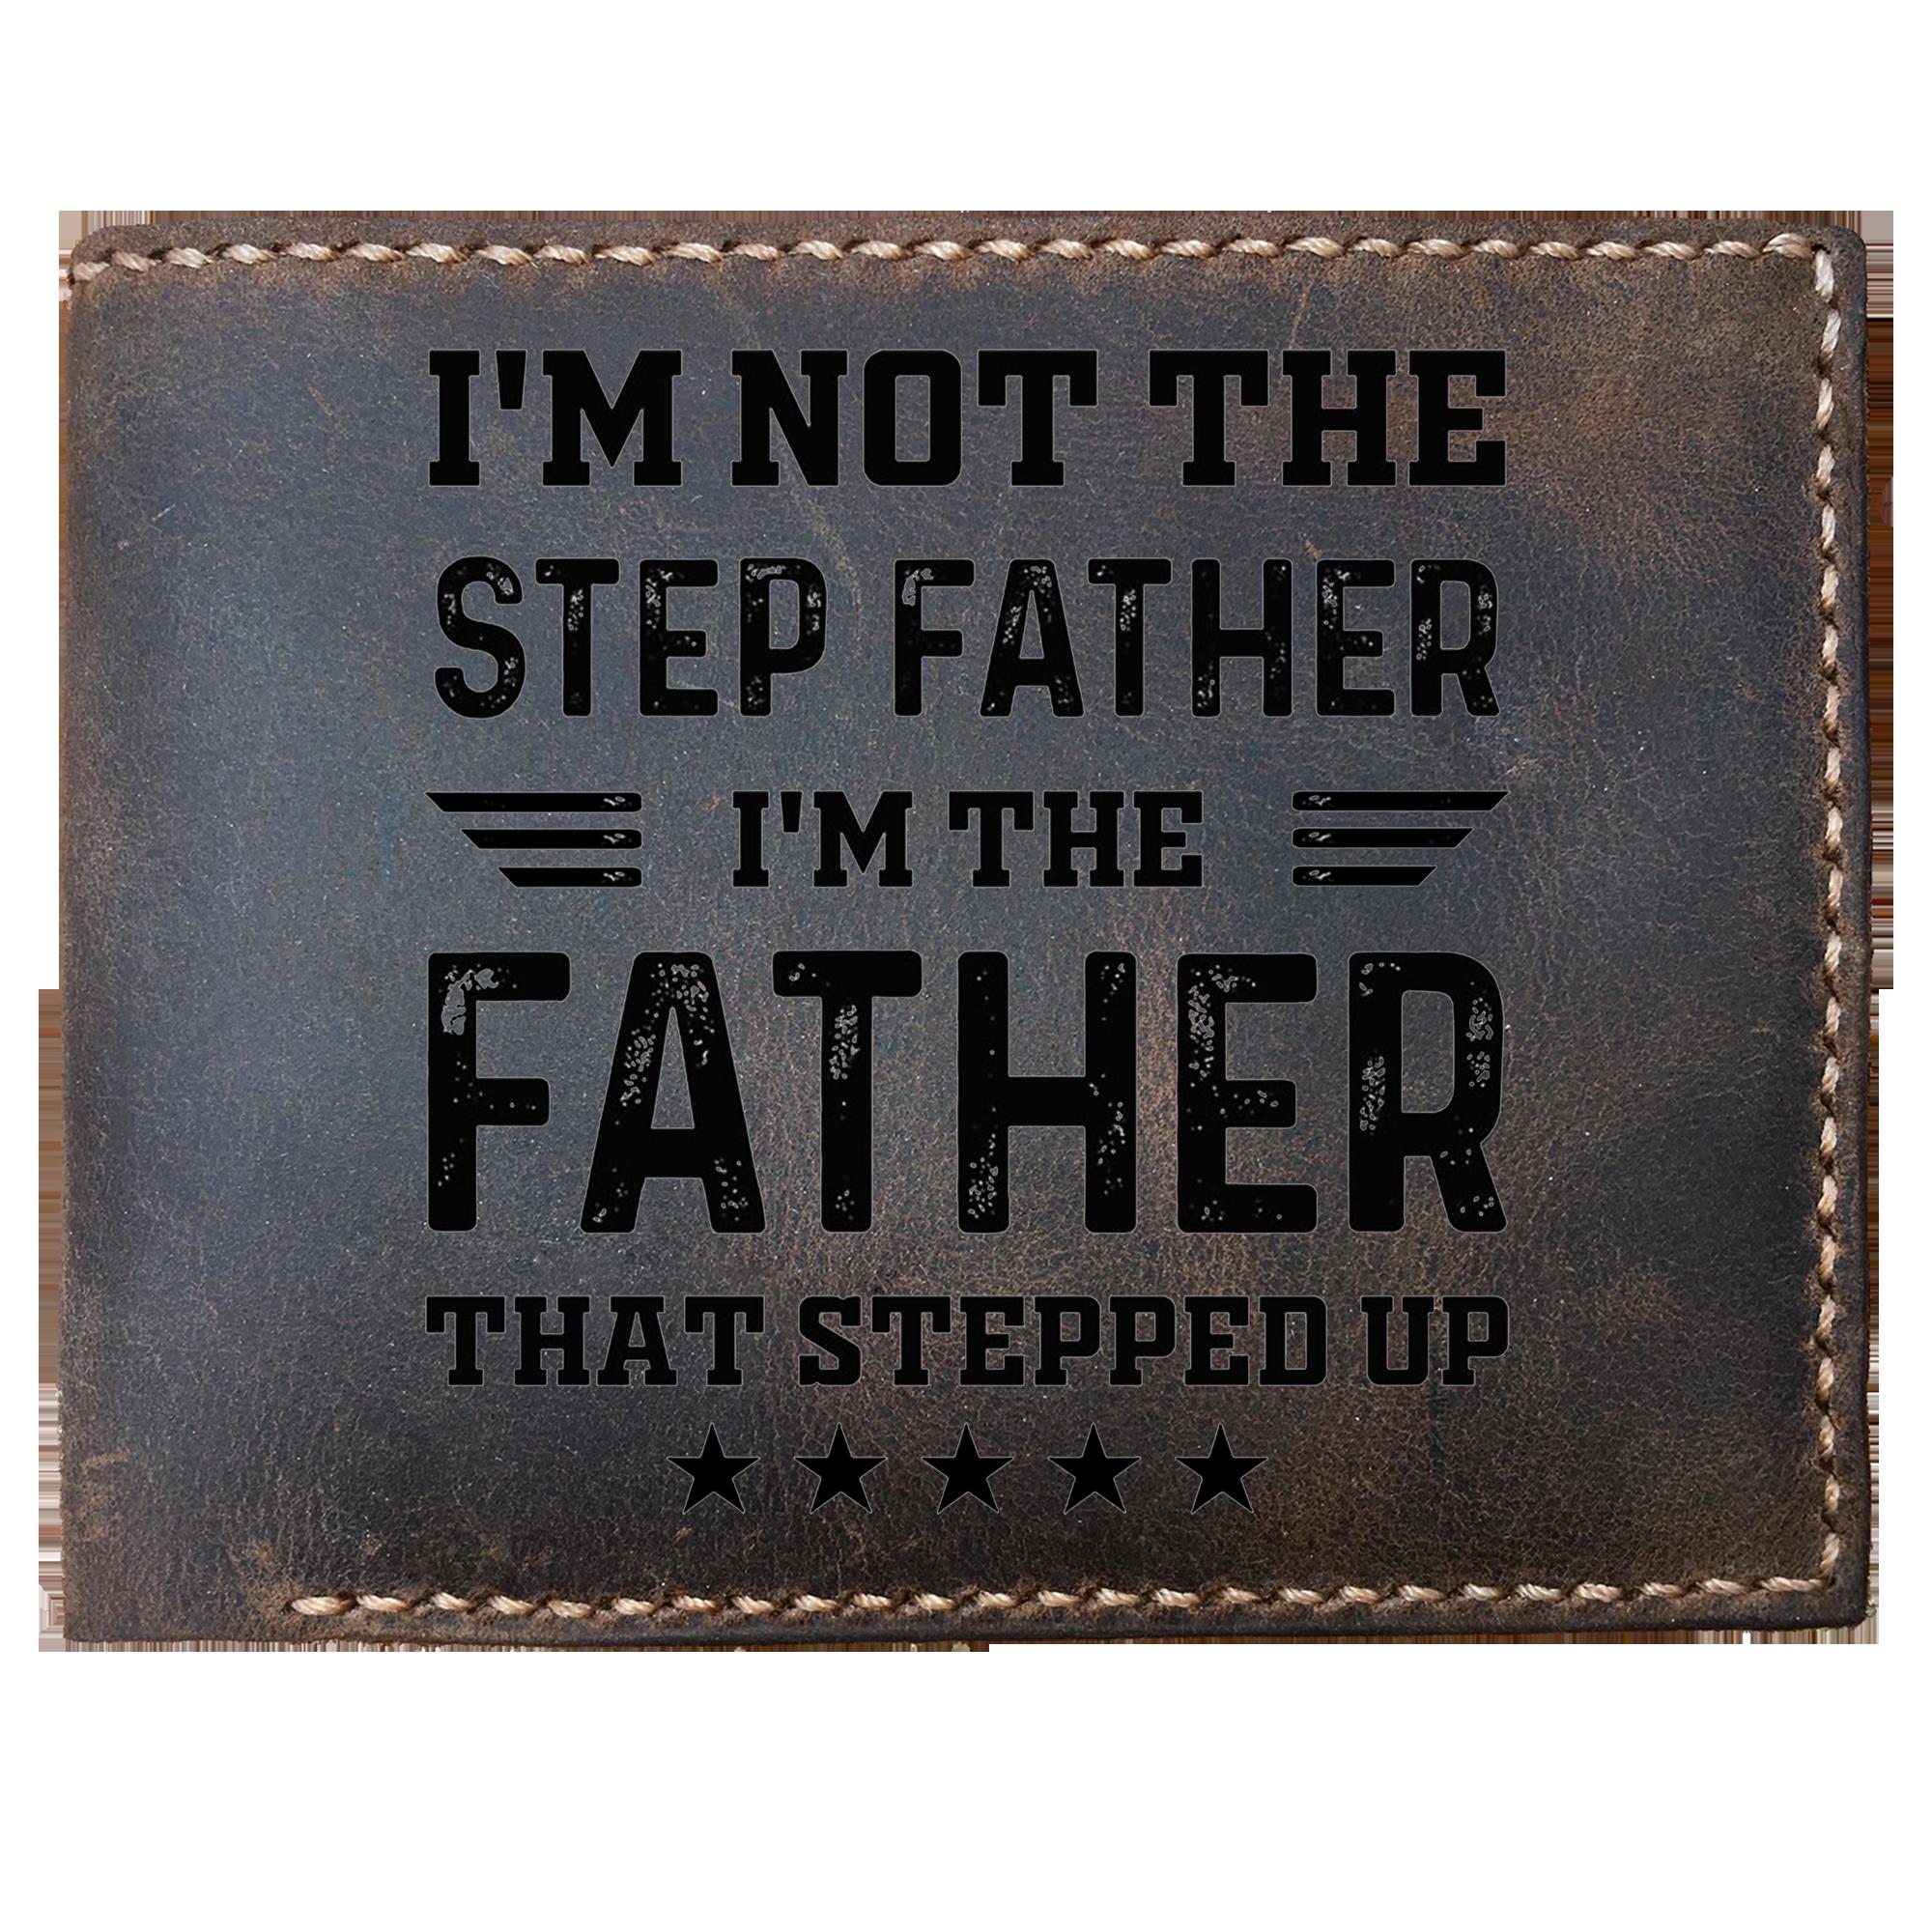 Skitongifts Funny Custom Laser Engraved Bifold Leather Wallet For Men, I'm Not The Step Father I'm The Father That Stepped Up S